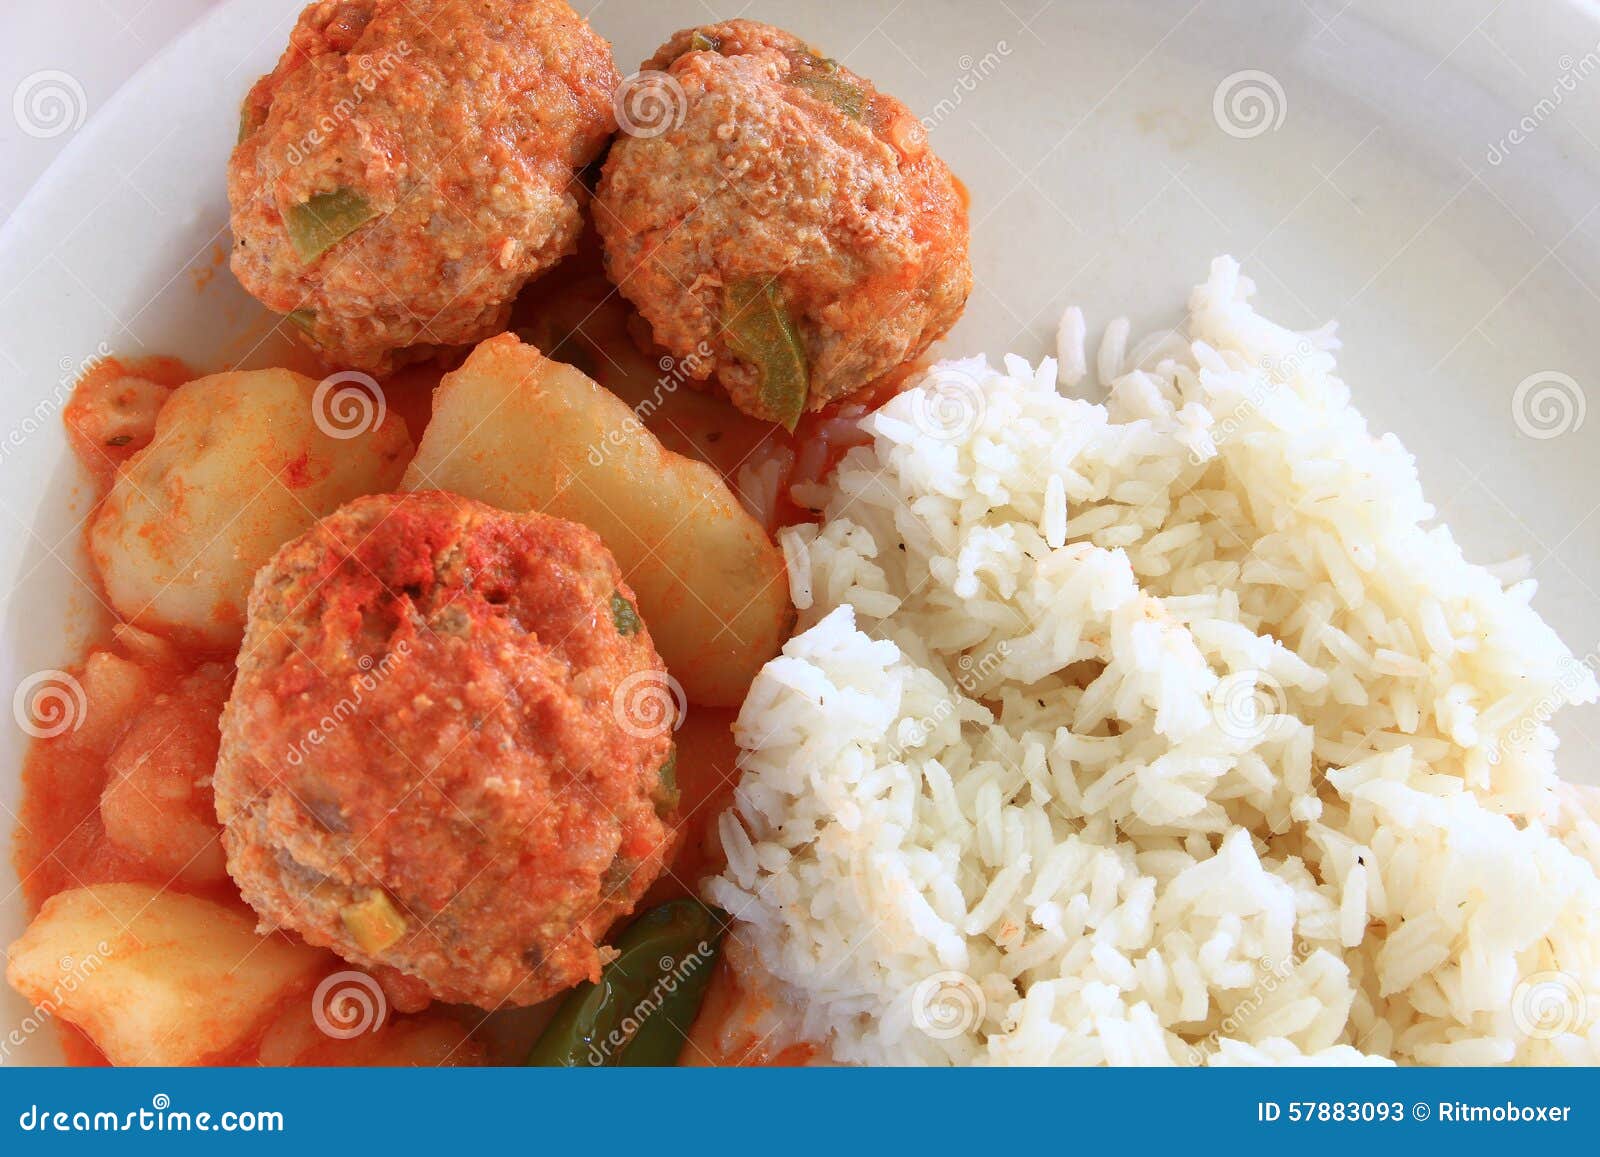 turkey albondigas with vegetables and rice